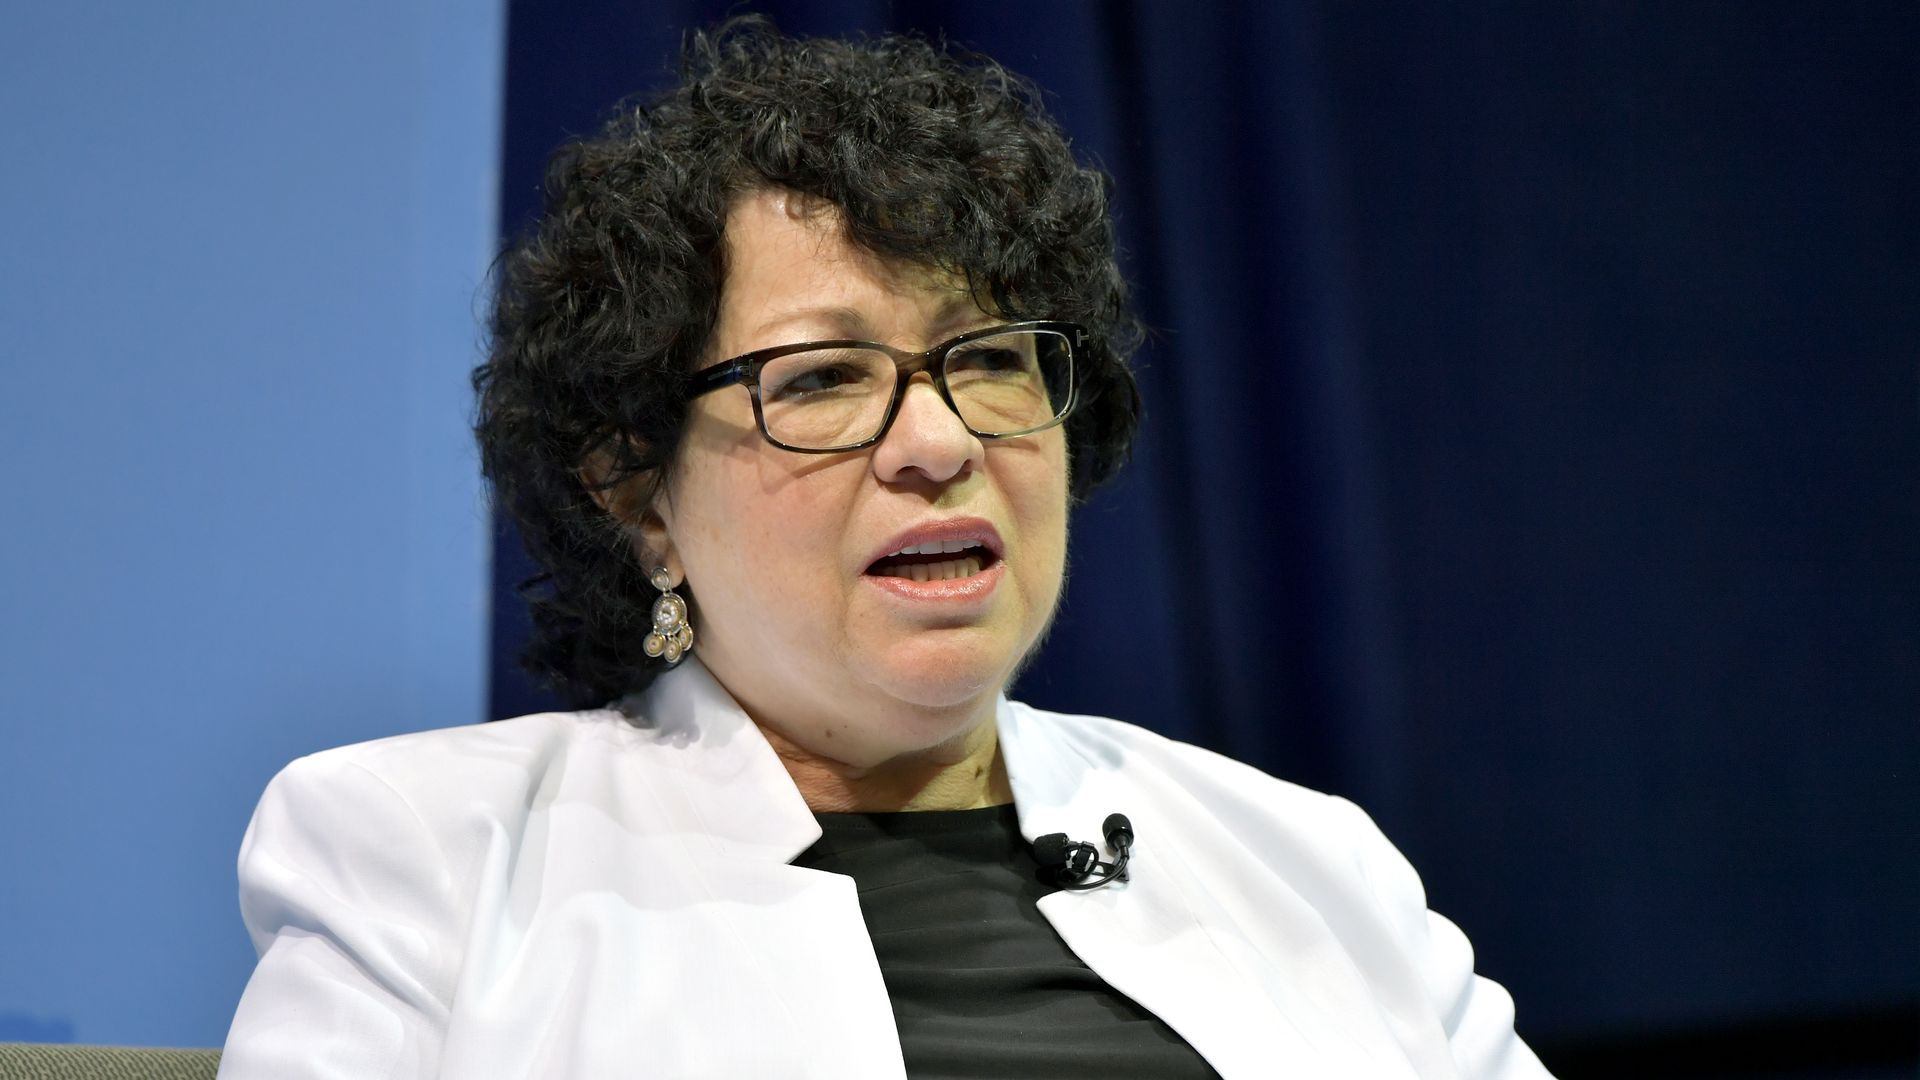 In this image, Supreme Court Justice Sonia Sotomayor sits 